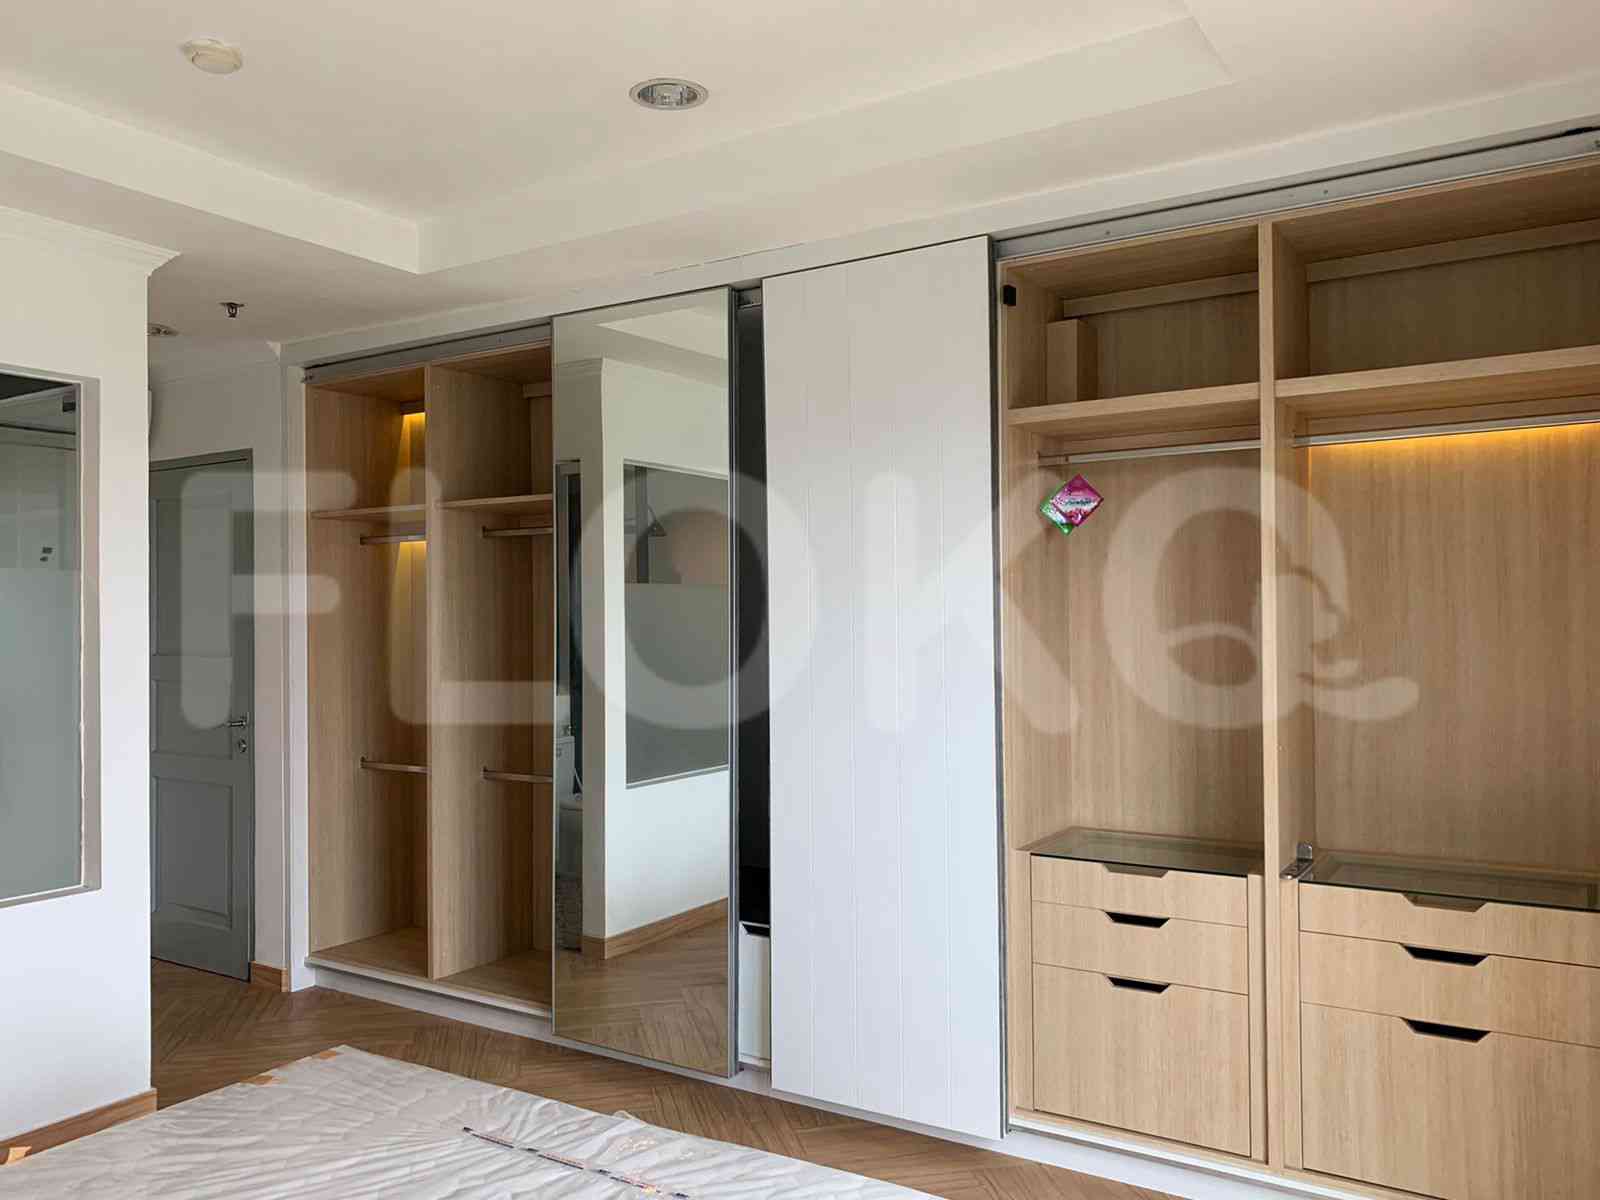 3 Bedroom on 6th Floor for Rent in Gading Resort Residence - fkeb22 5